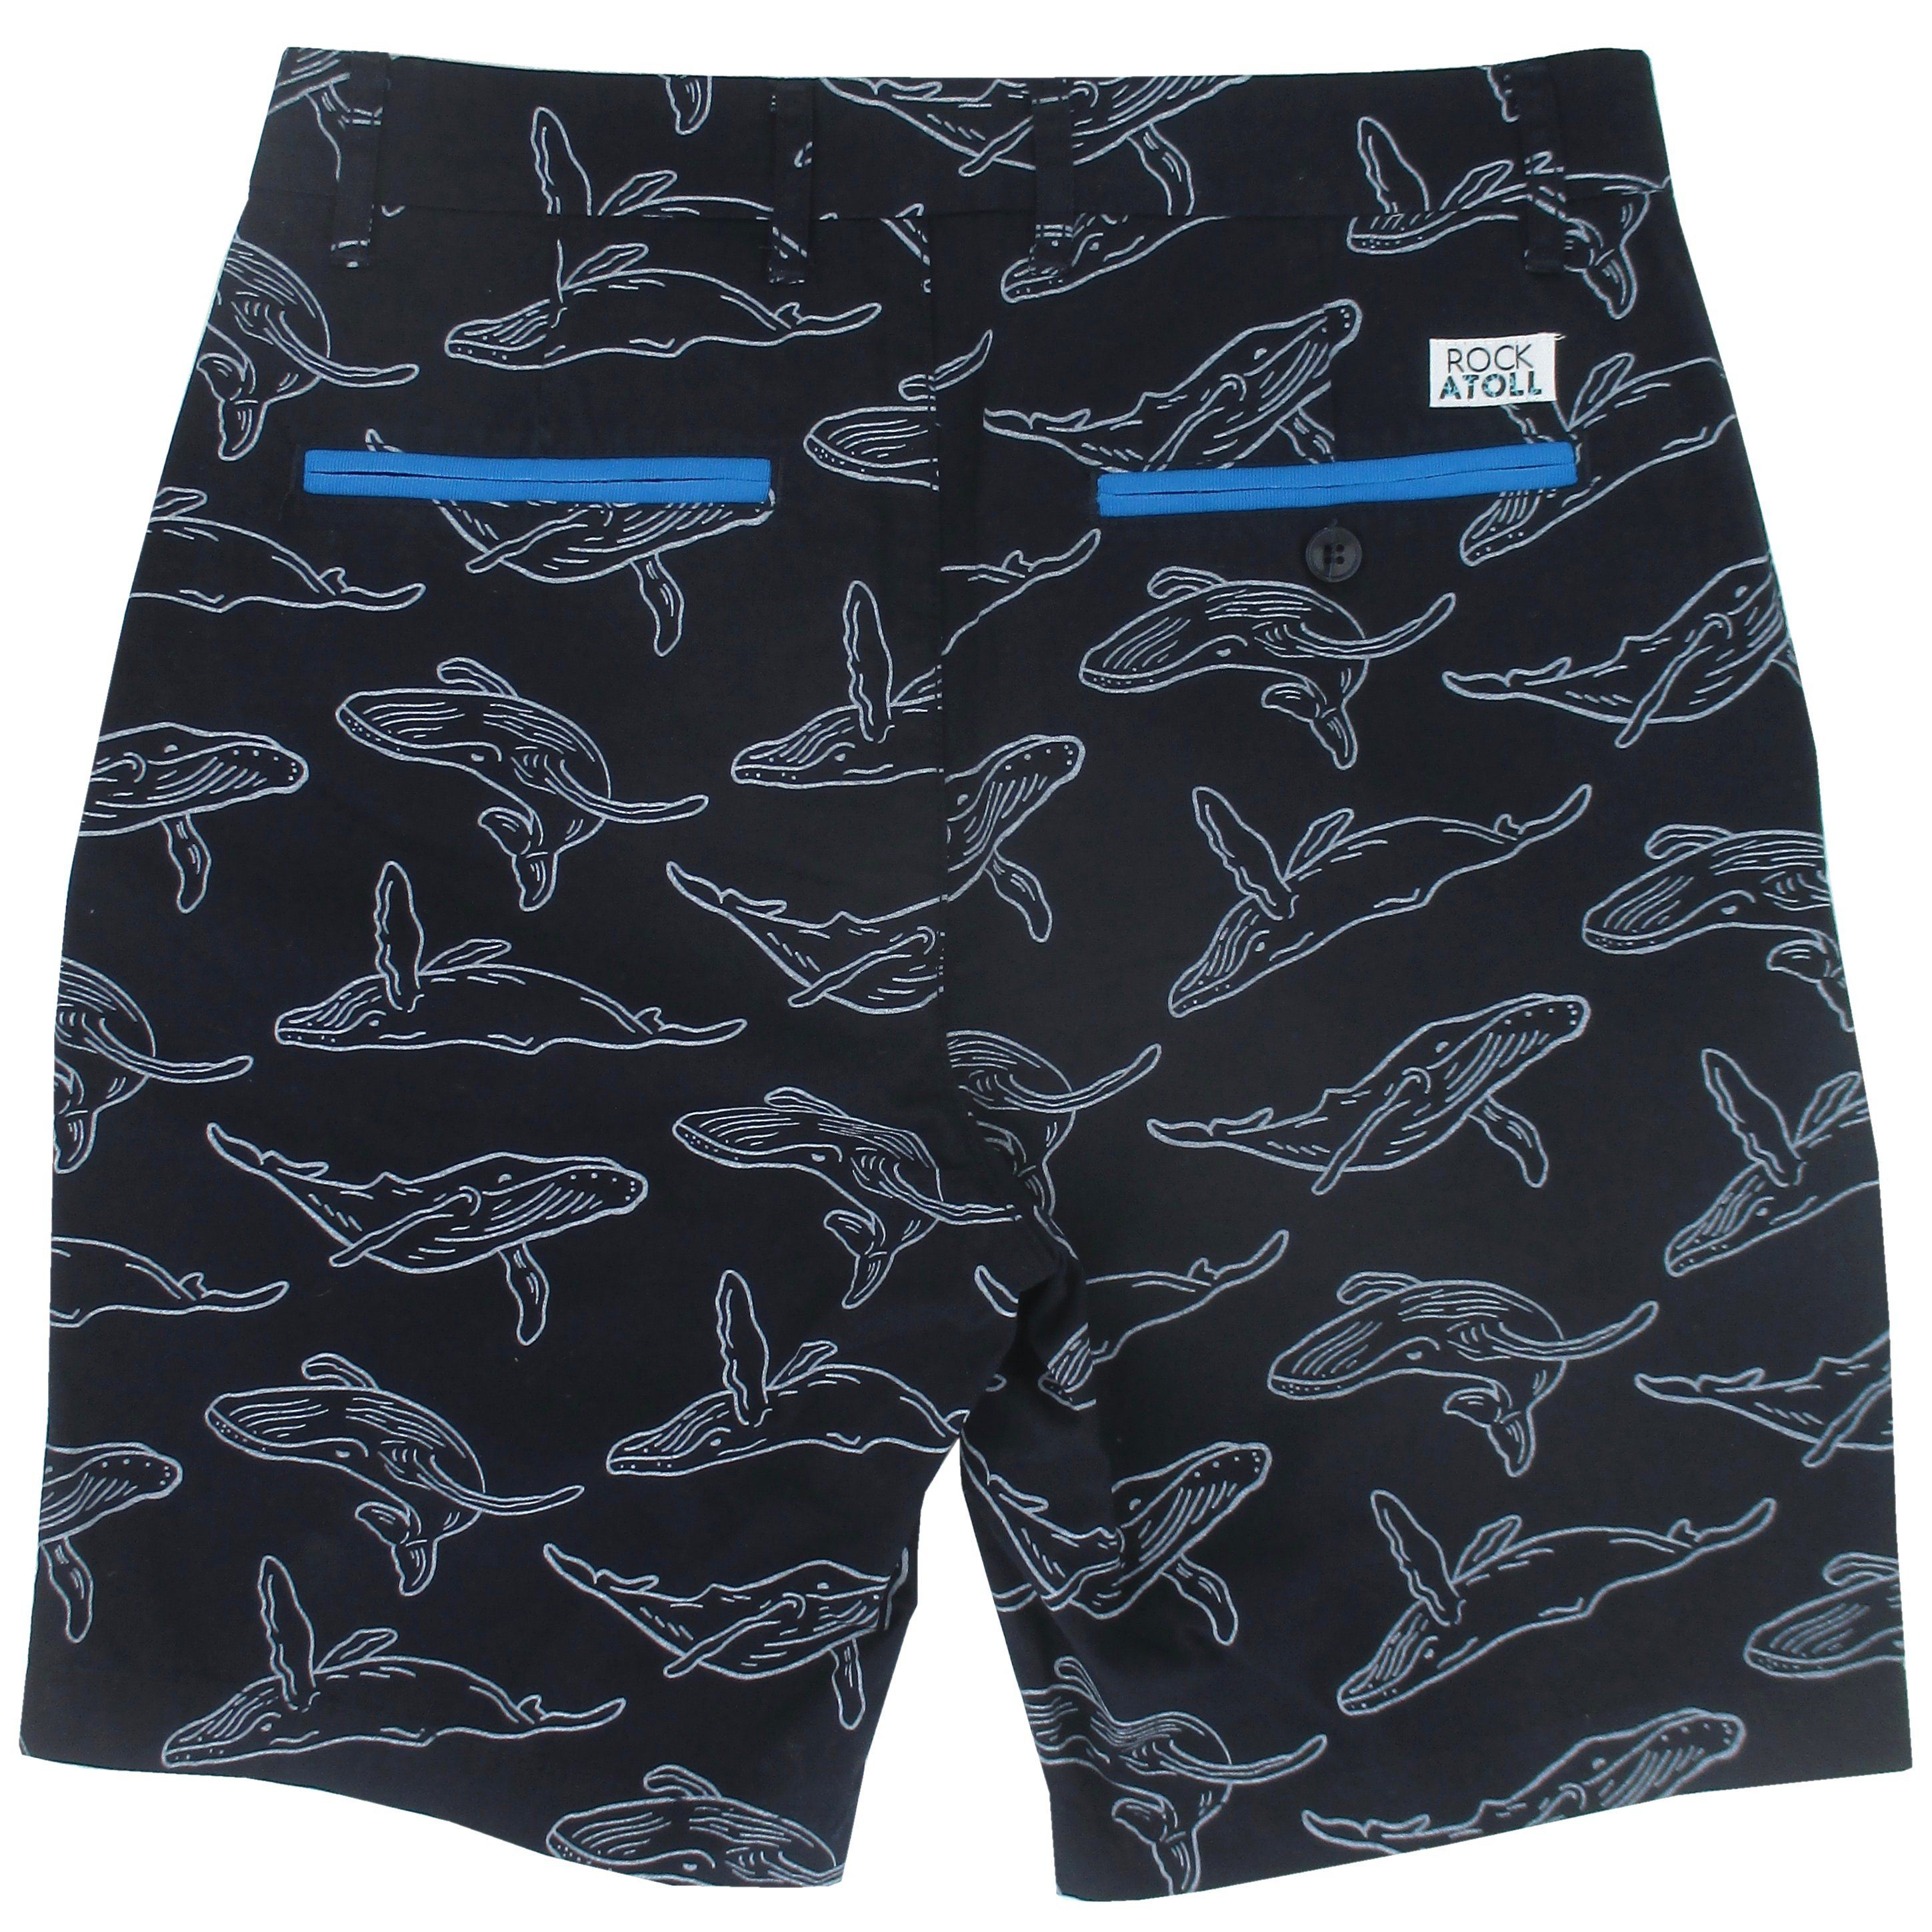 Rock Atoll Menswear Humpback Whale All Over Print Chino Flat Front Shorts for Men